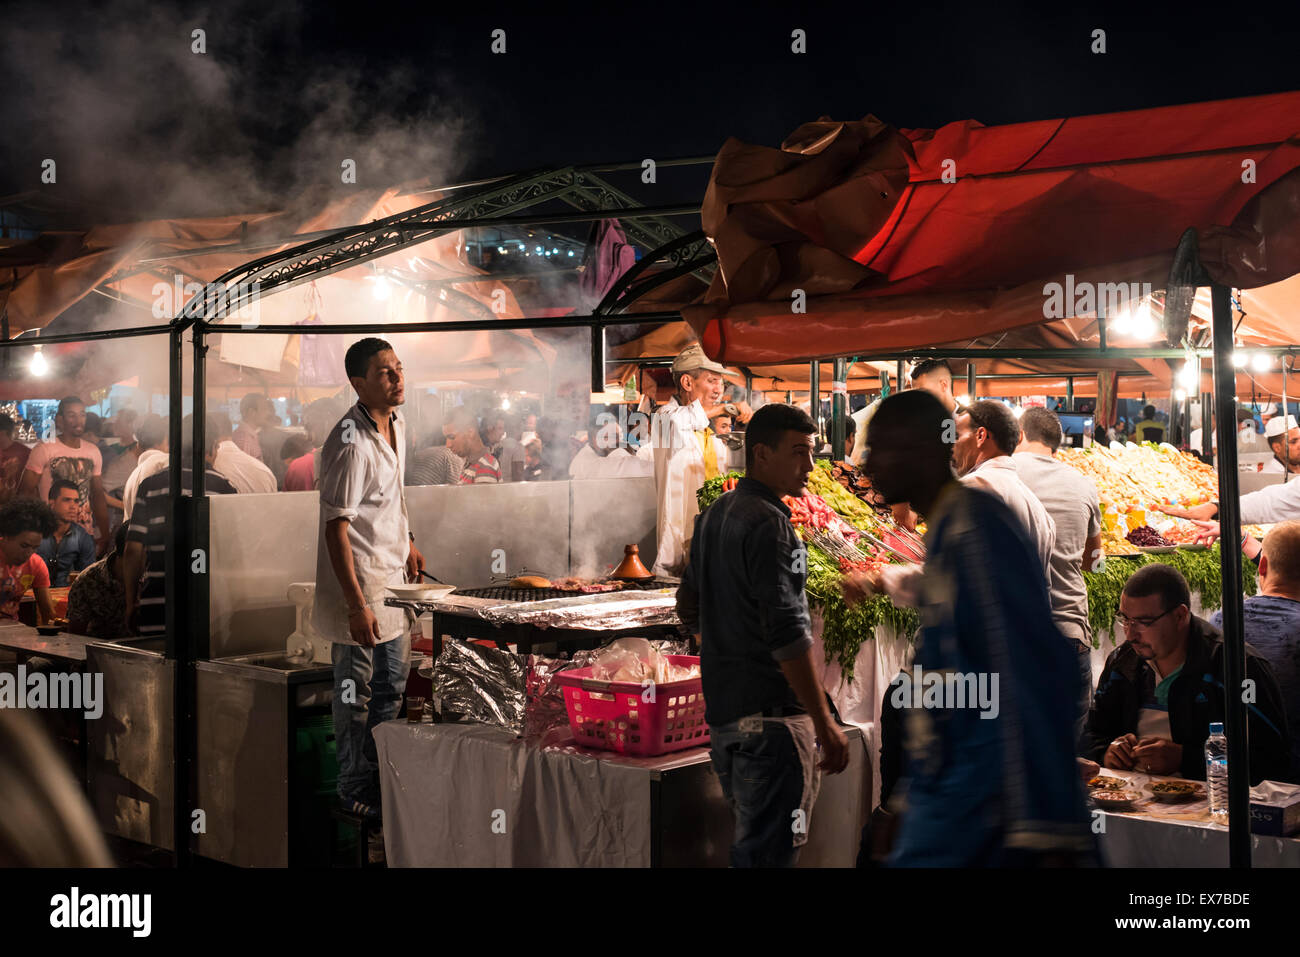 A great night at the Jemaa el Fna in Marrakech - Real Market Life Stock Photo